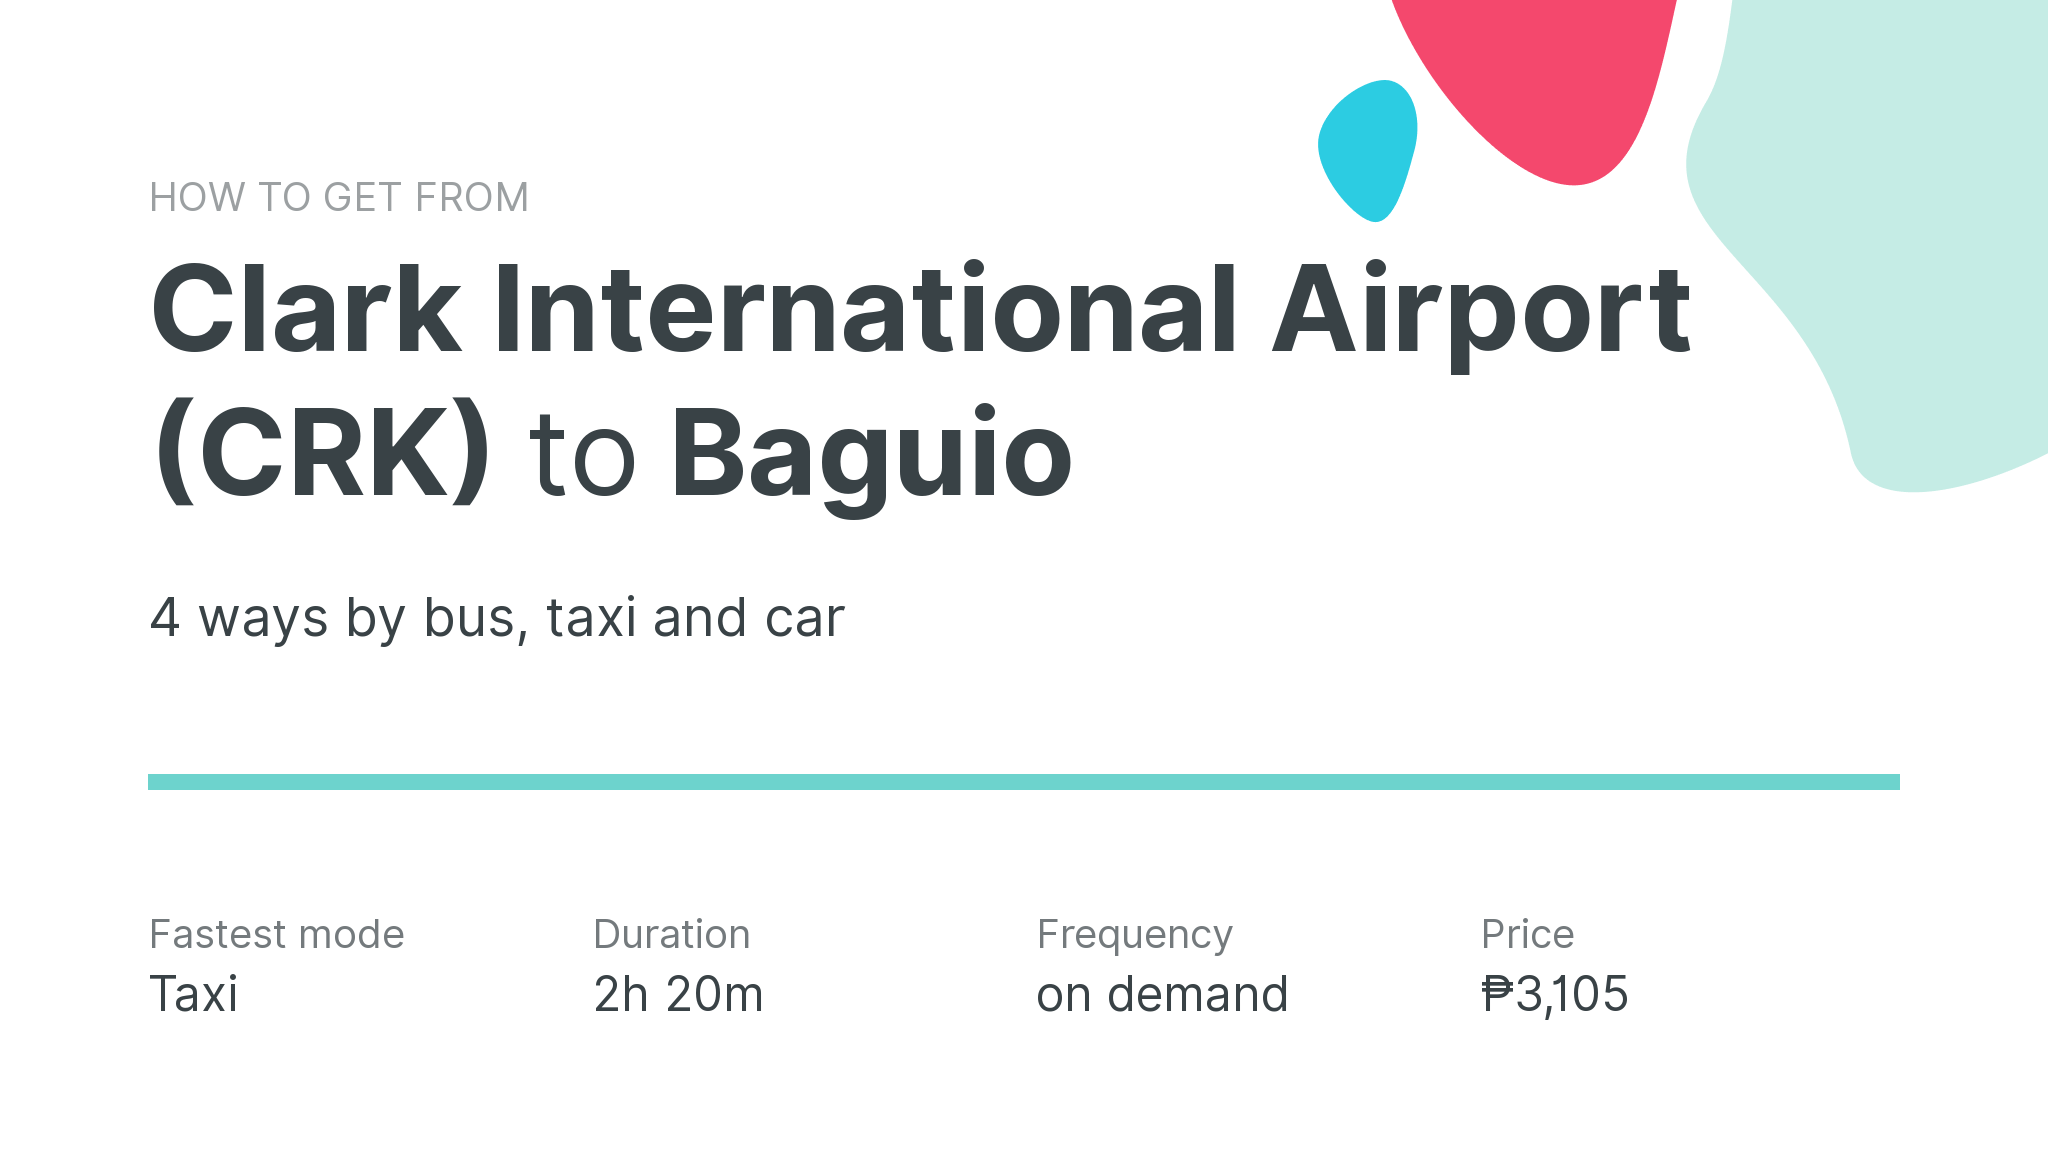 How do I get from Clark International Airport (CRK) to Baguio